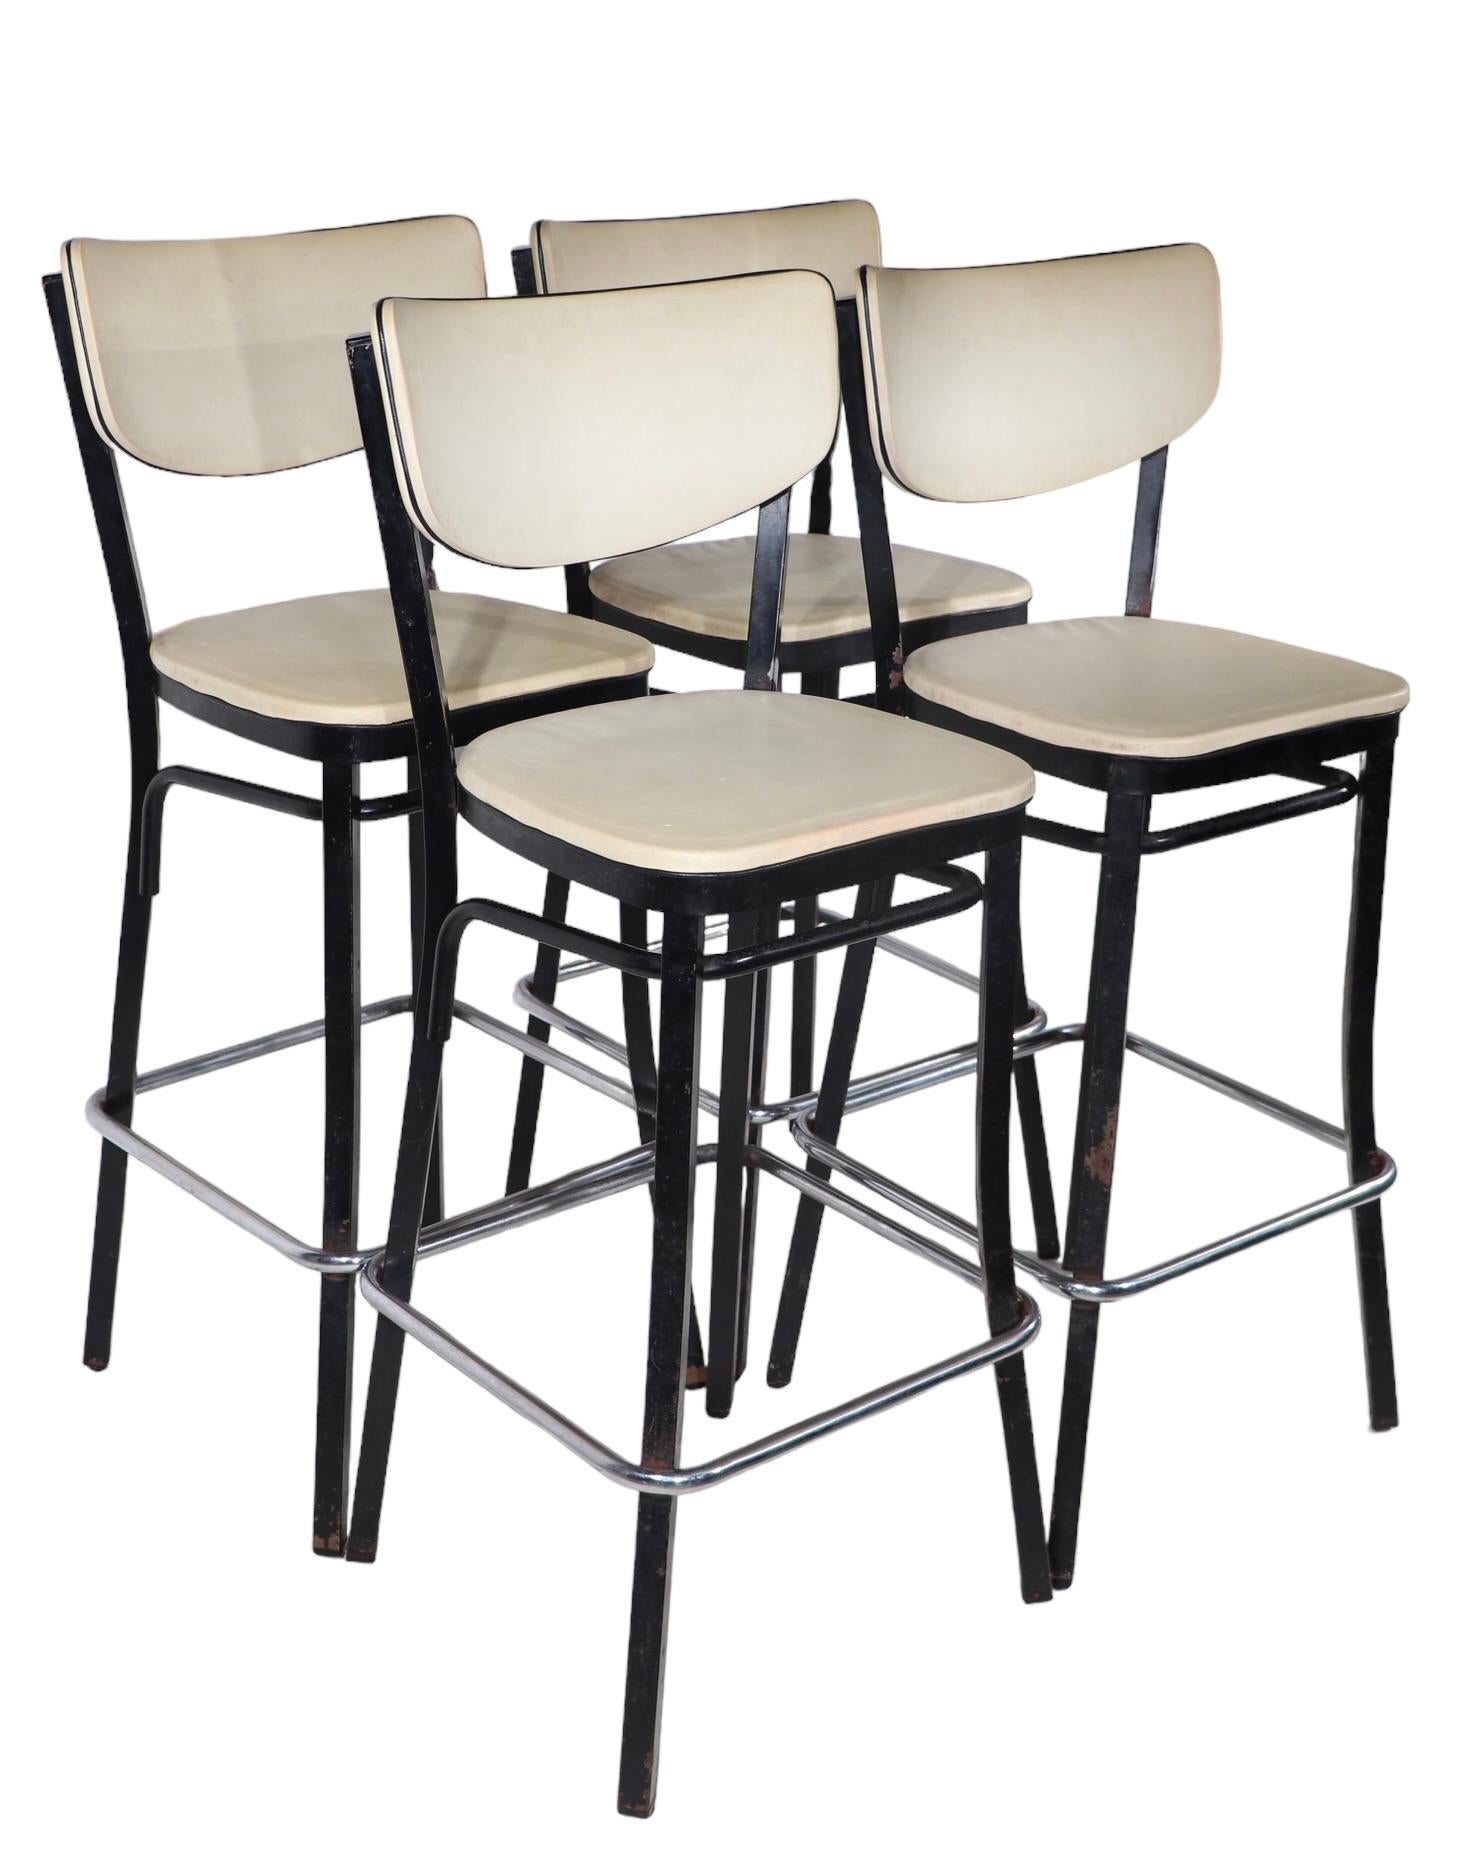 Set of Four Mid Century Bar Stools by Finer Chrome Products Co. Inc. c 1950/1960 For Sale 2